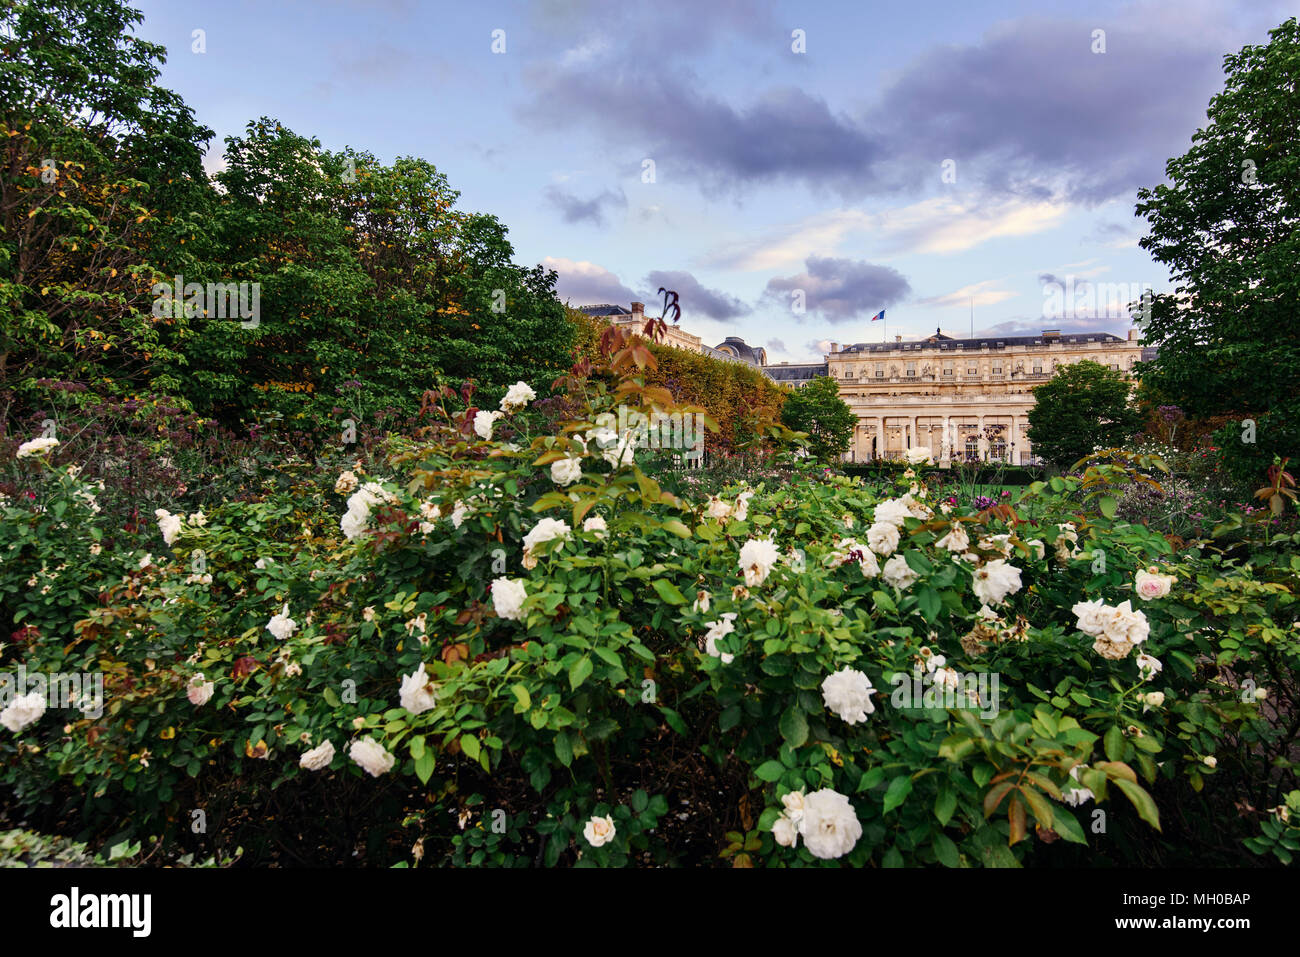 Royal Palace with Blooming Garden in Paris Stock Photo